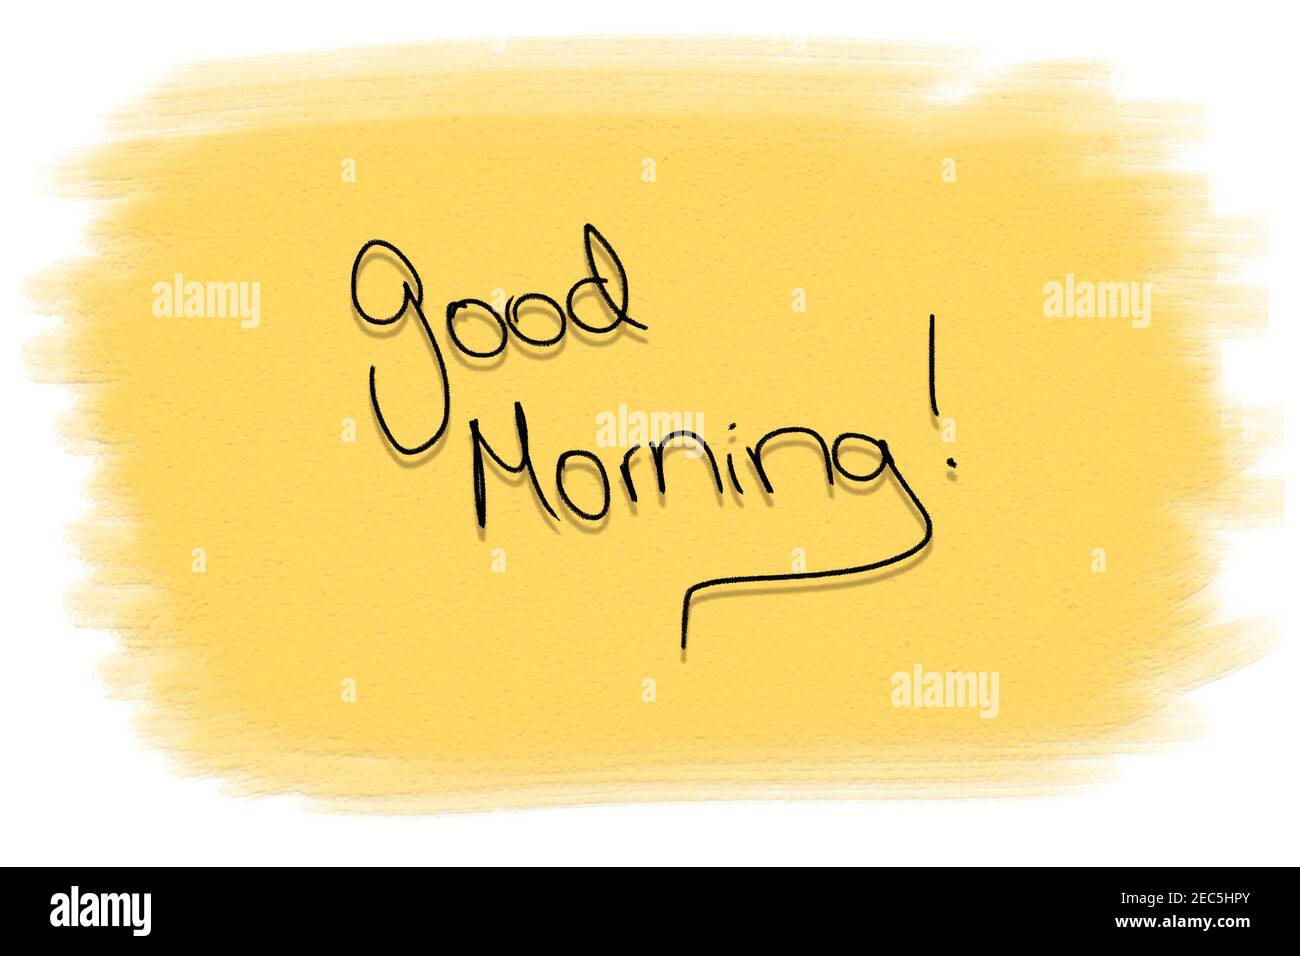 Good morning, text, pastel background, simple, message, hand ...